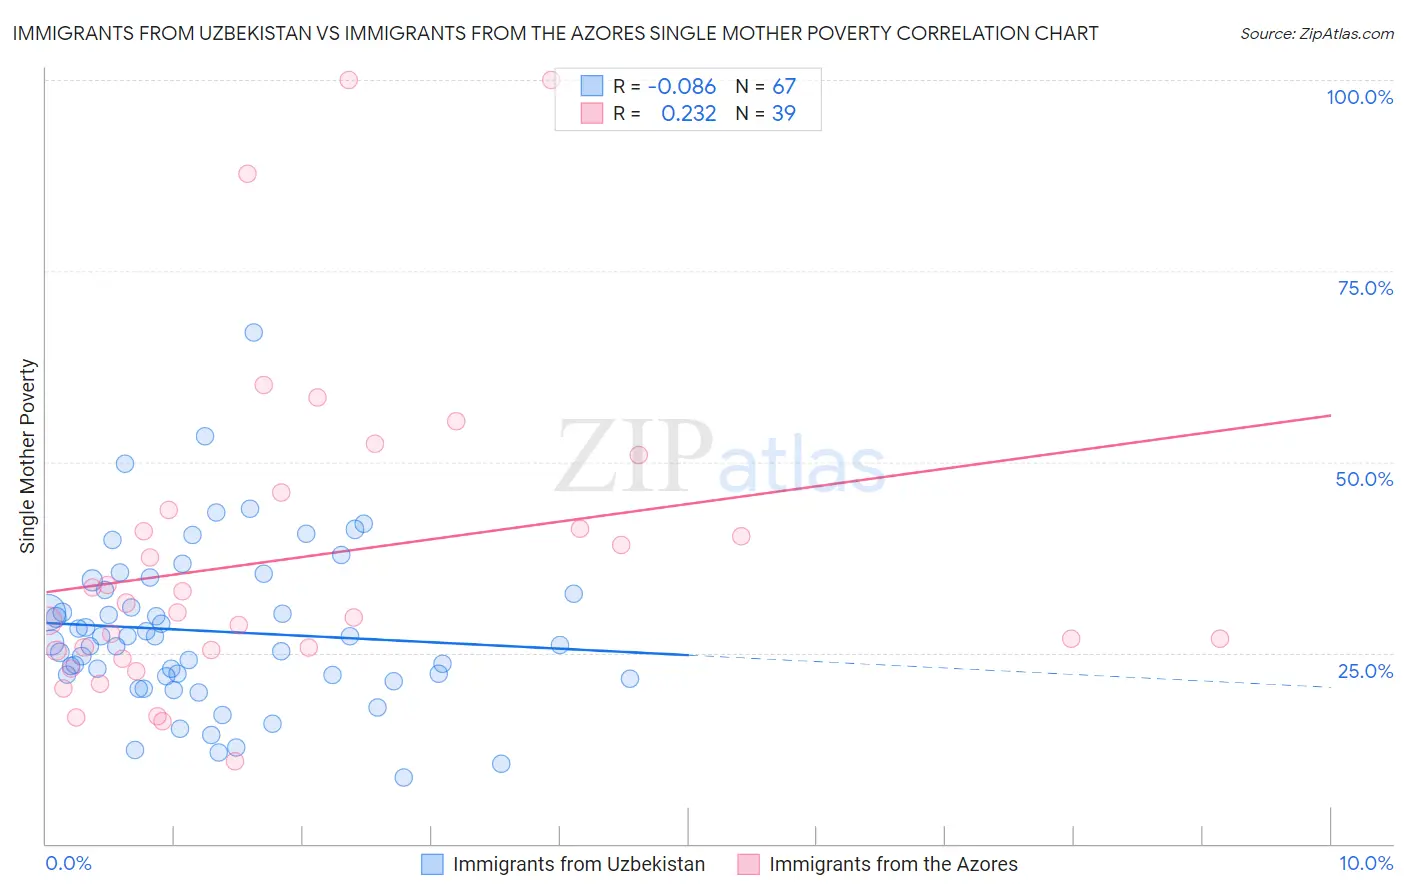 Immigrants from Uzbekistan vs Immigrants from the Azores Single Mother Poverty